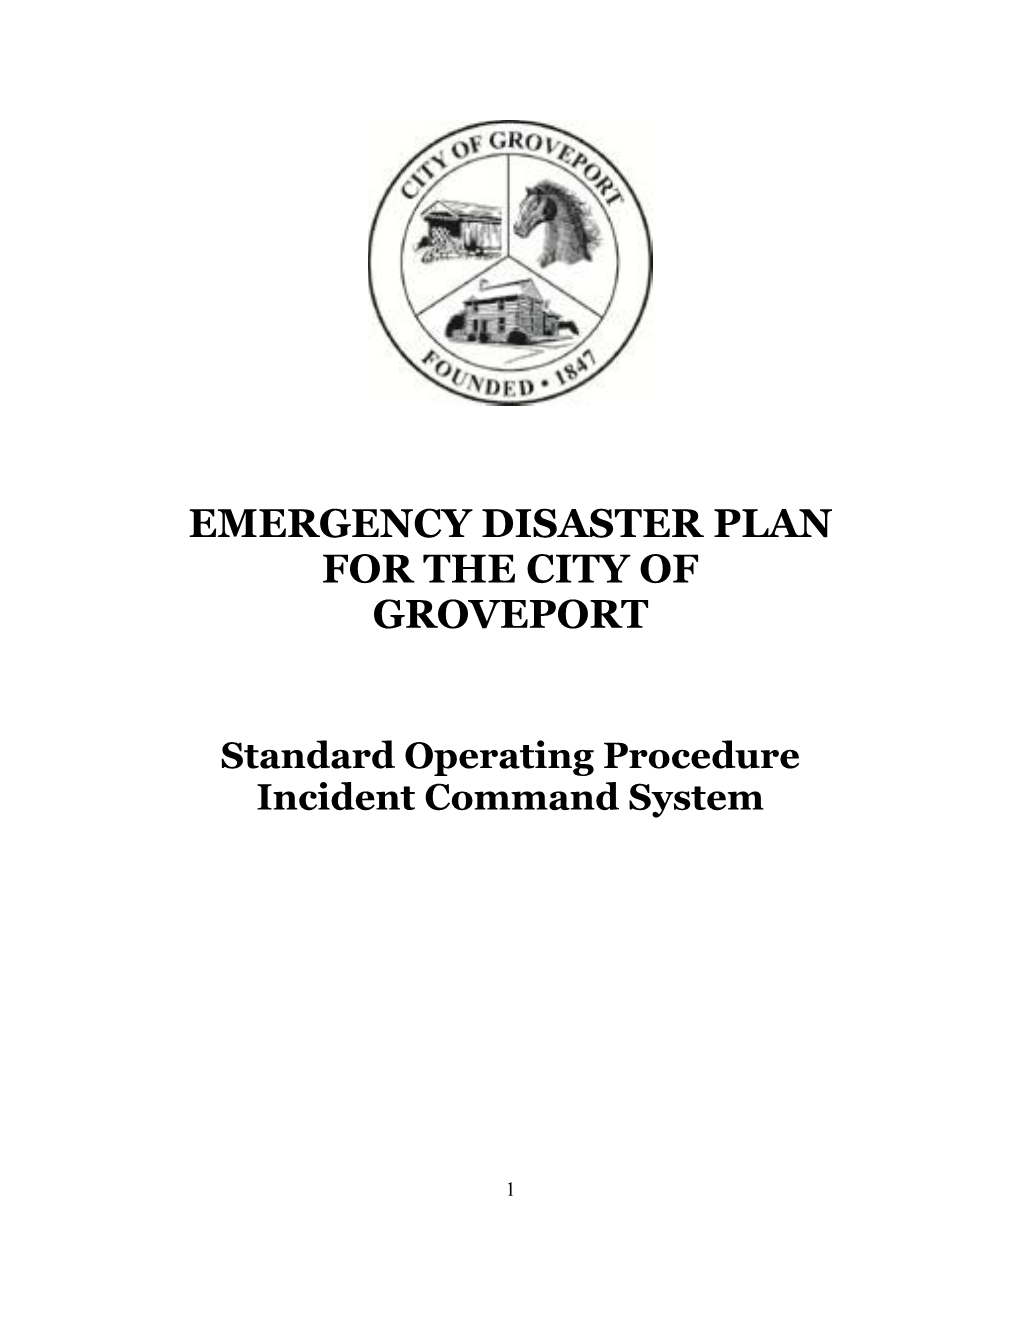 Emergency Disaster Plan for the City of Groveport